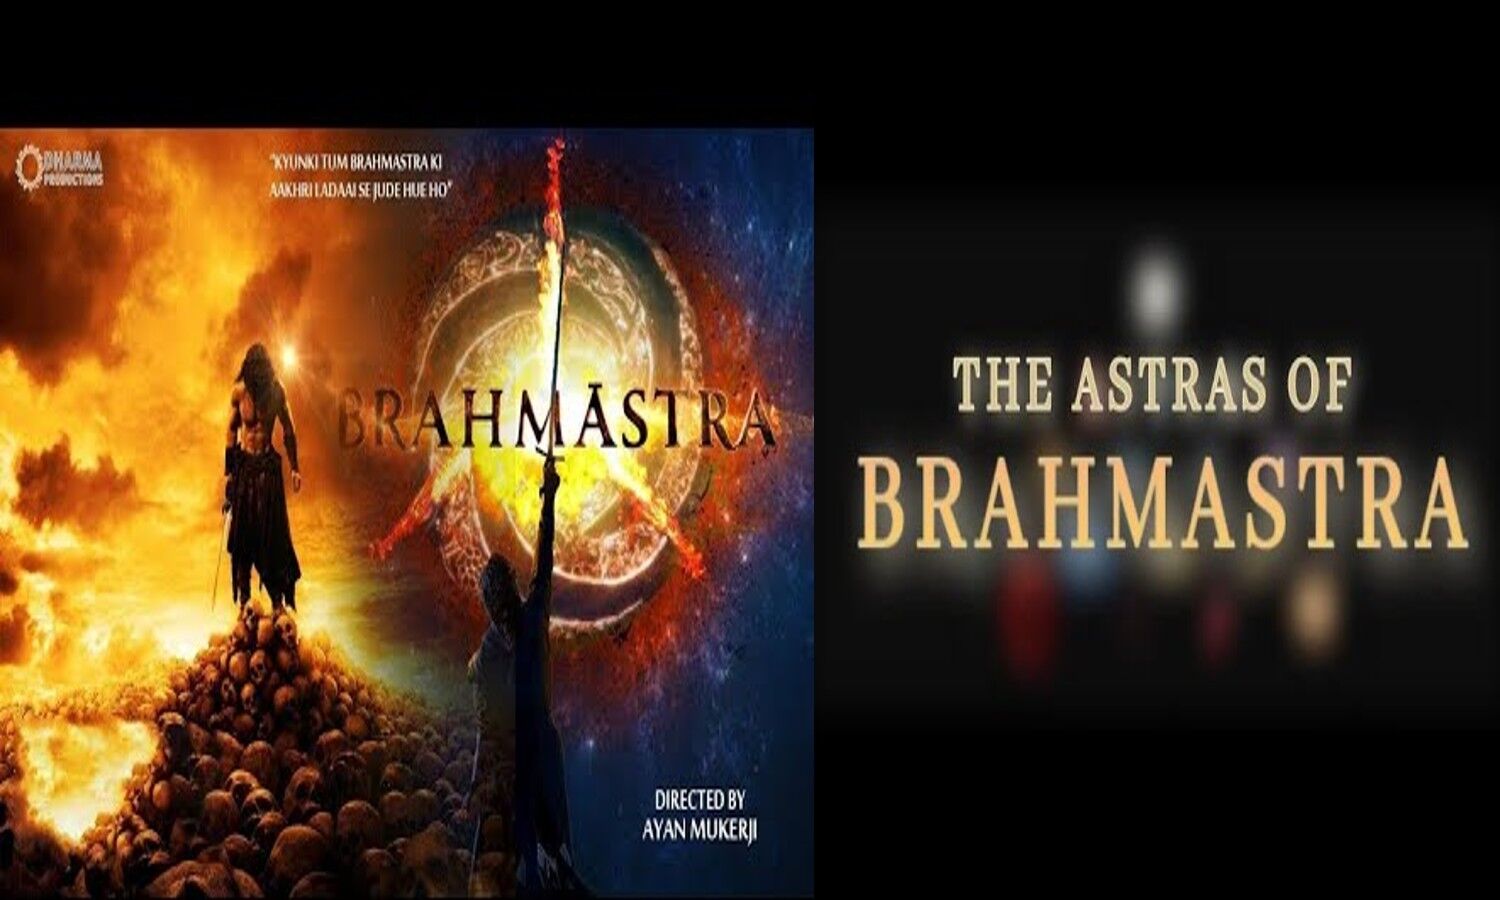 Brahmastra Download: The movie has arrived on Telegram in HD, this is how downloads are happening